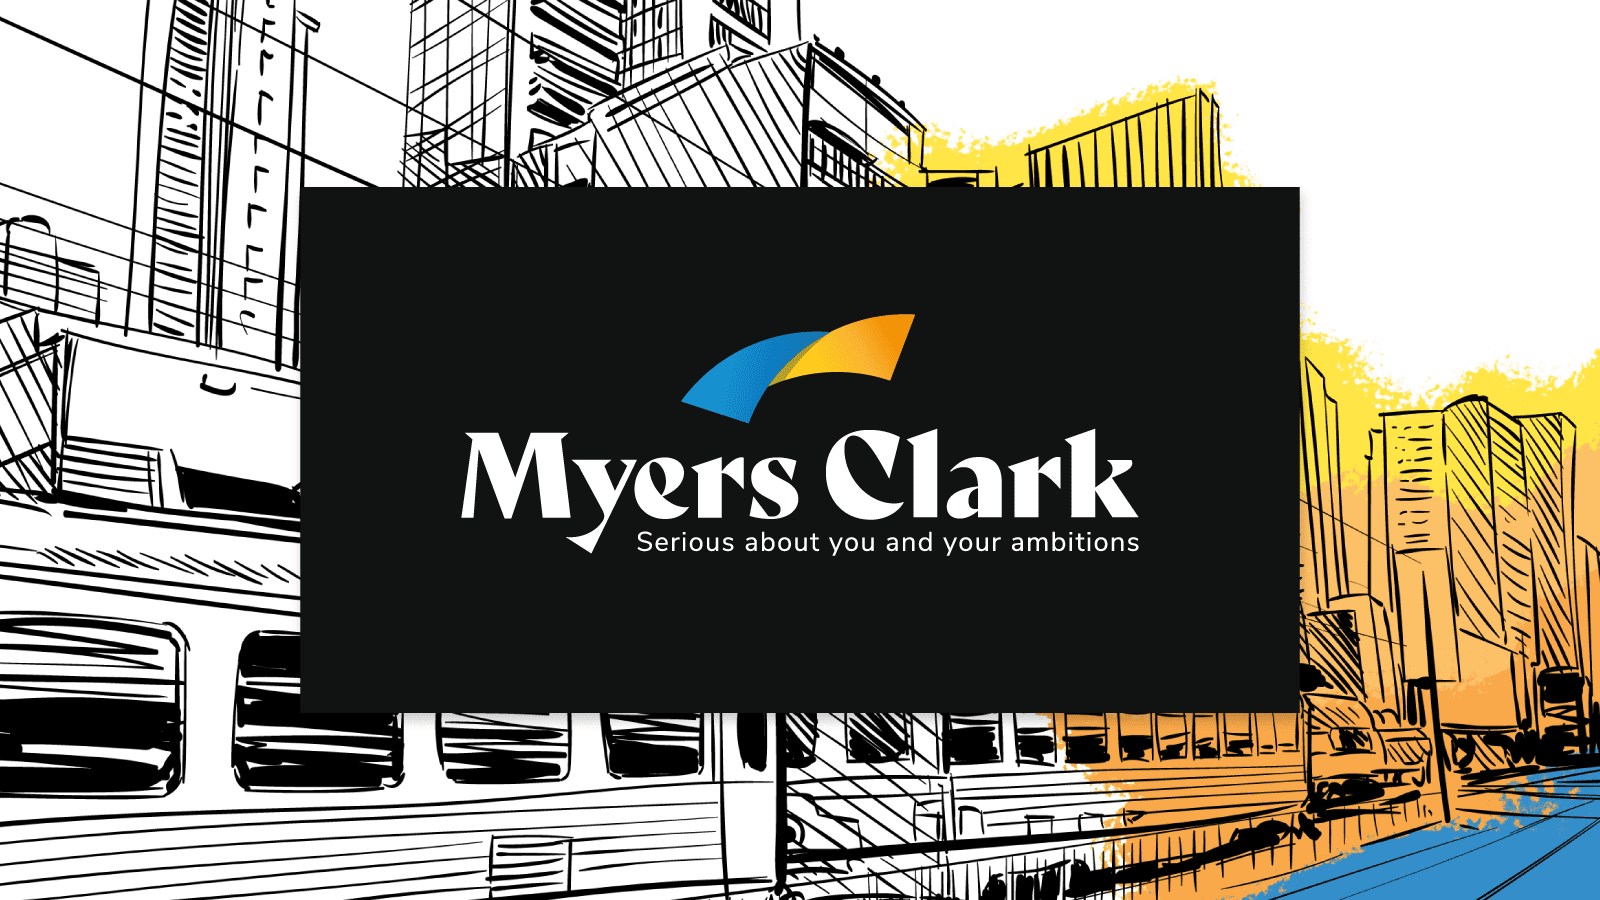 The story behind the Myers Clark rebrand